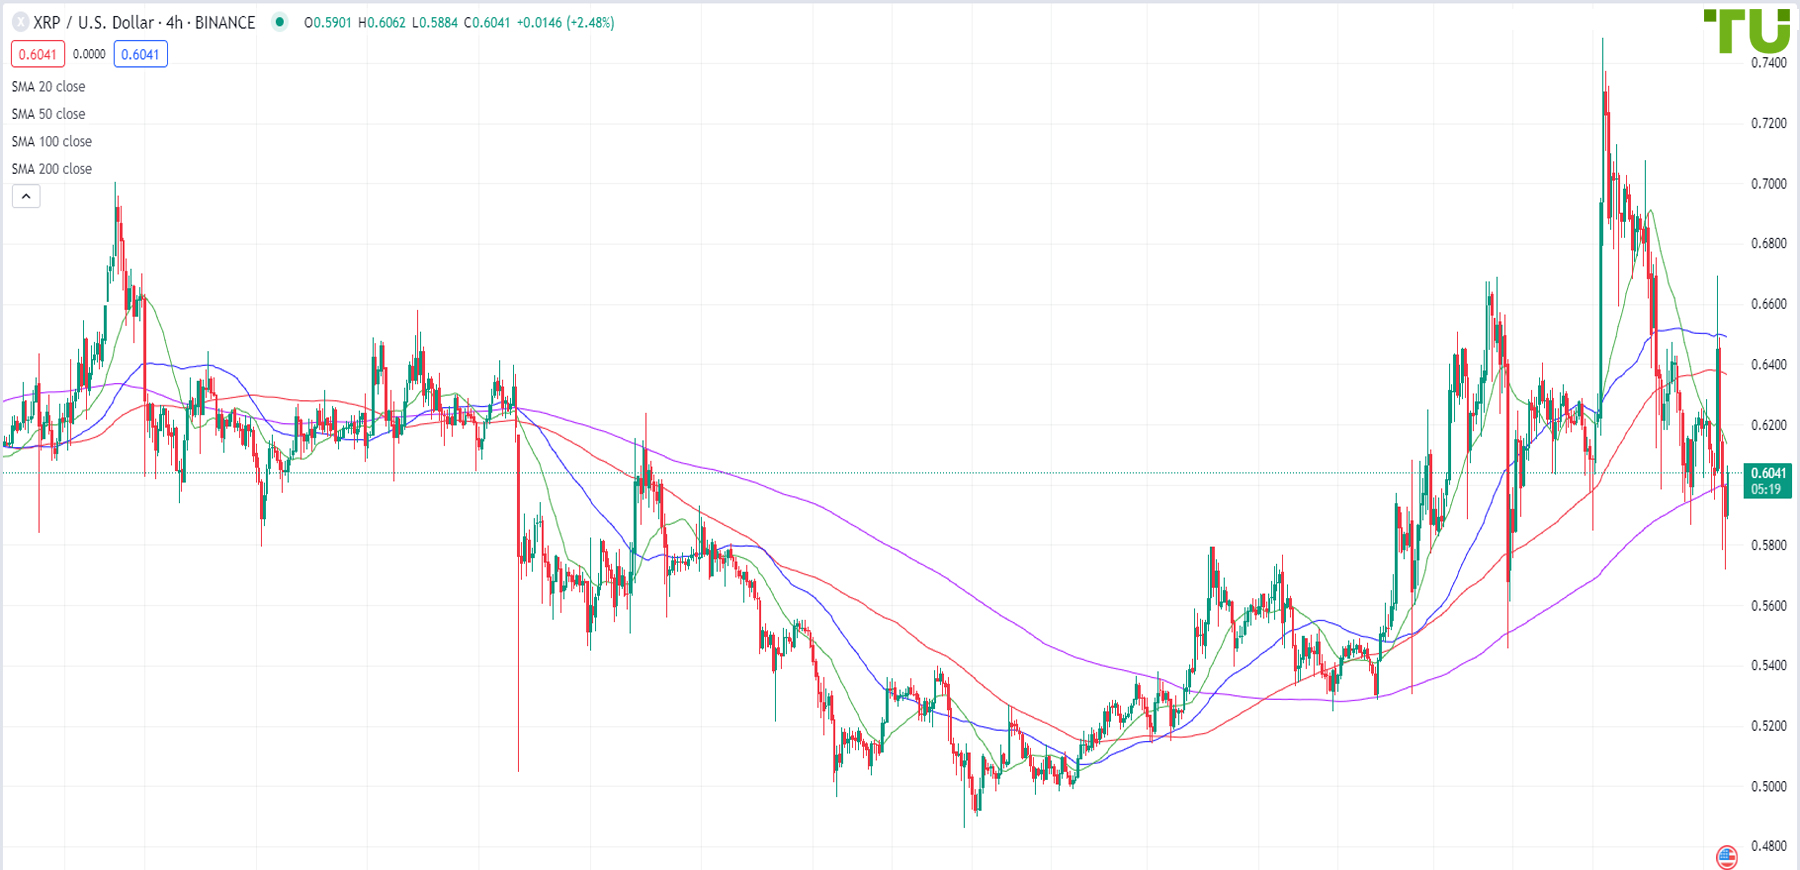 XRP/USD continues to fall